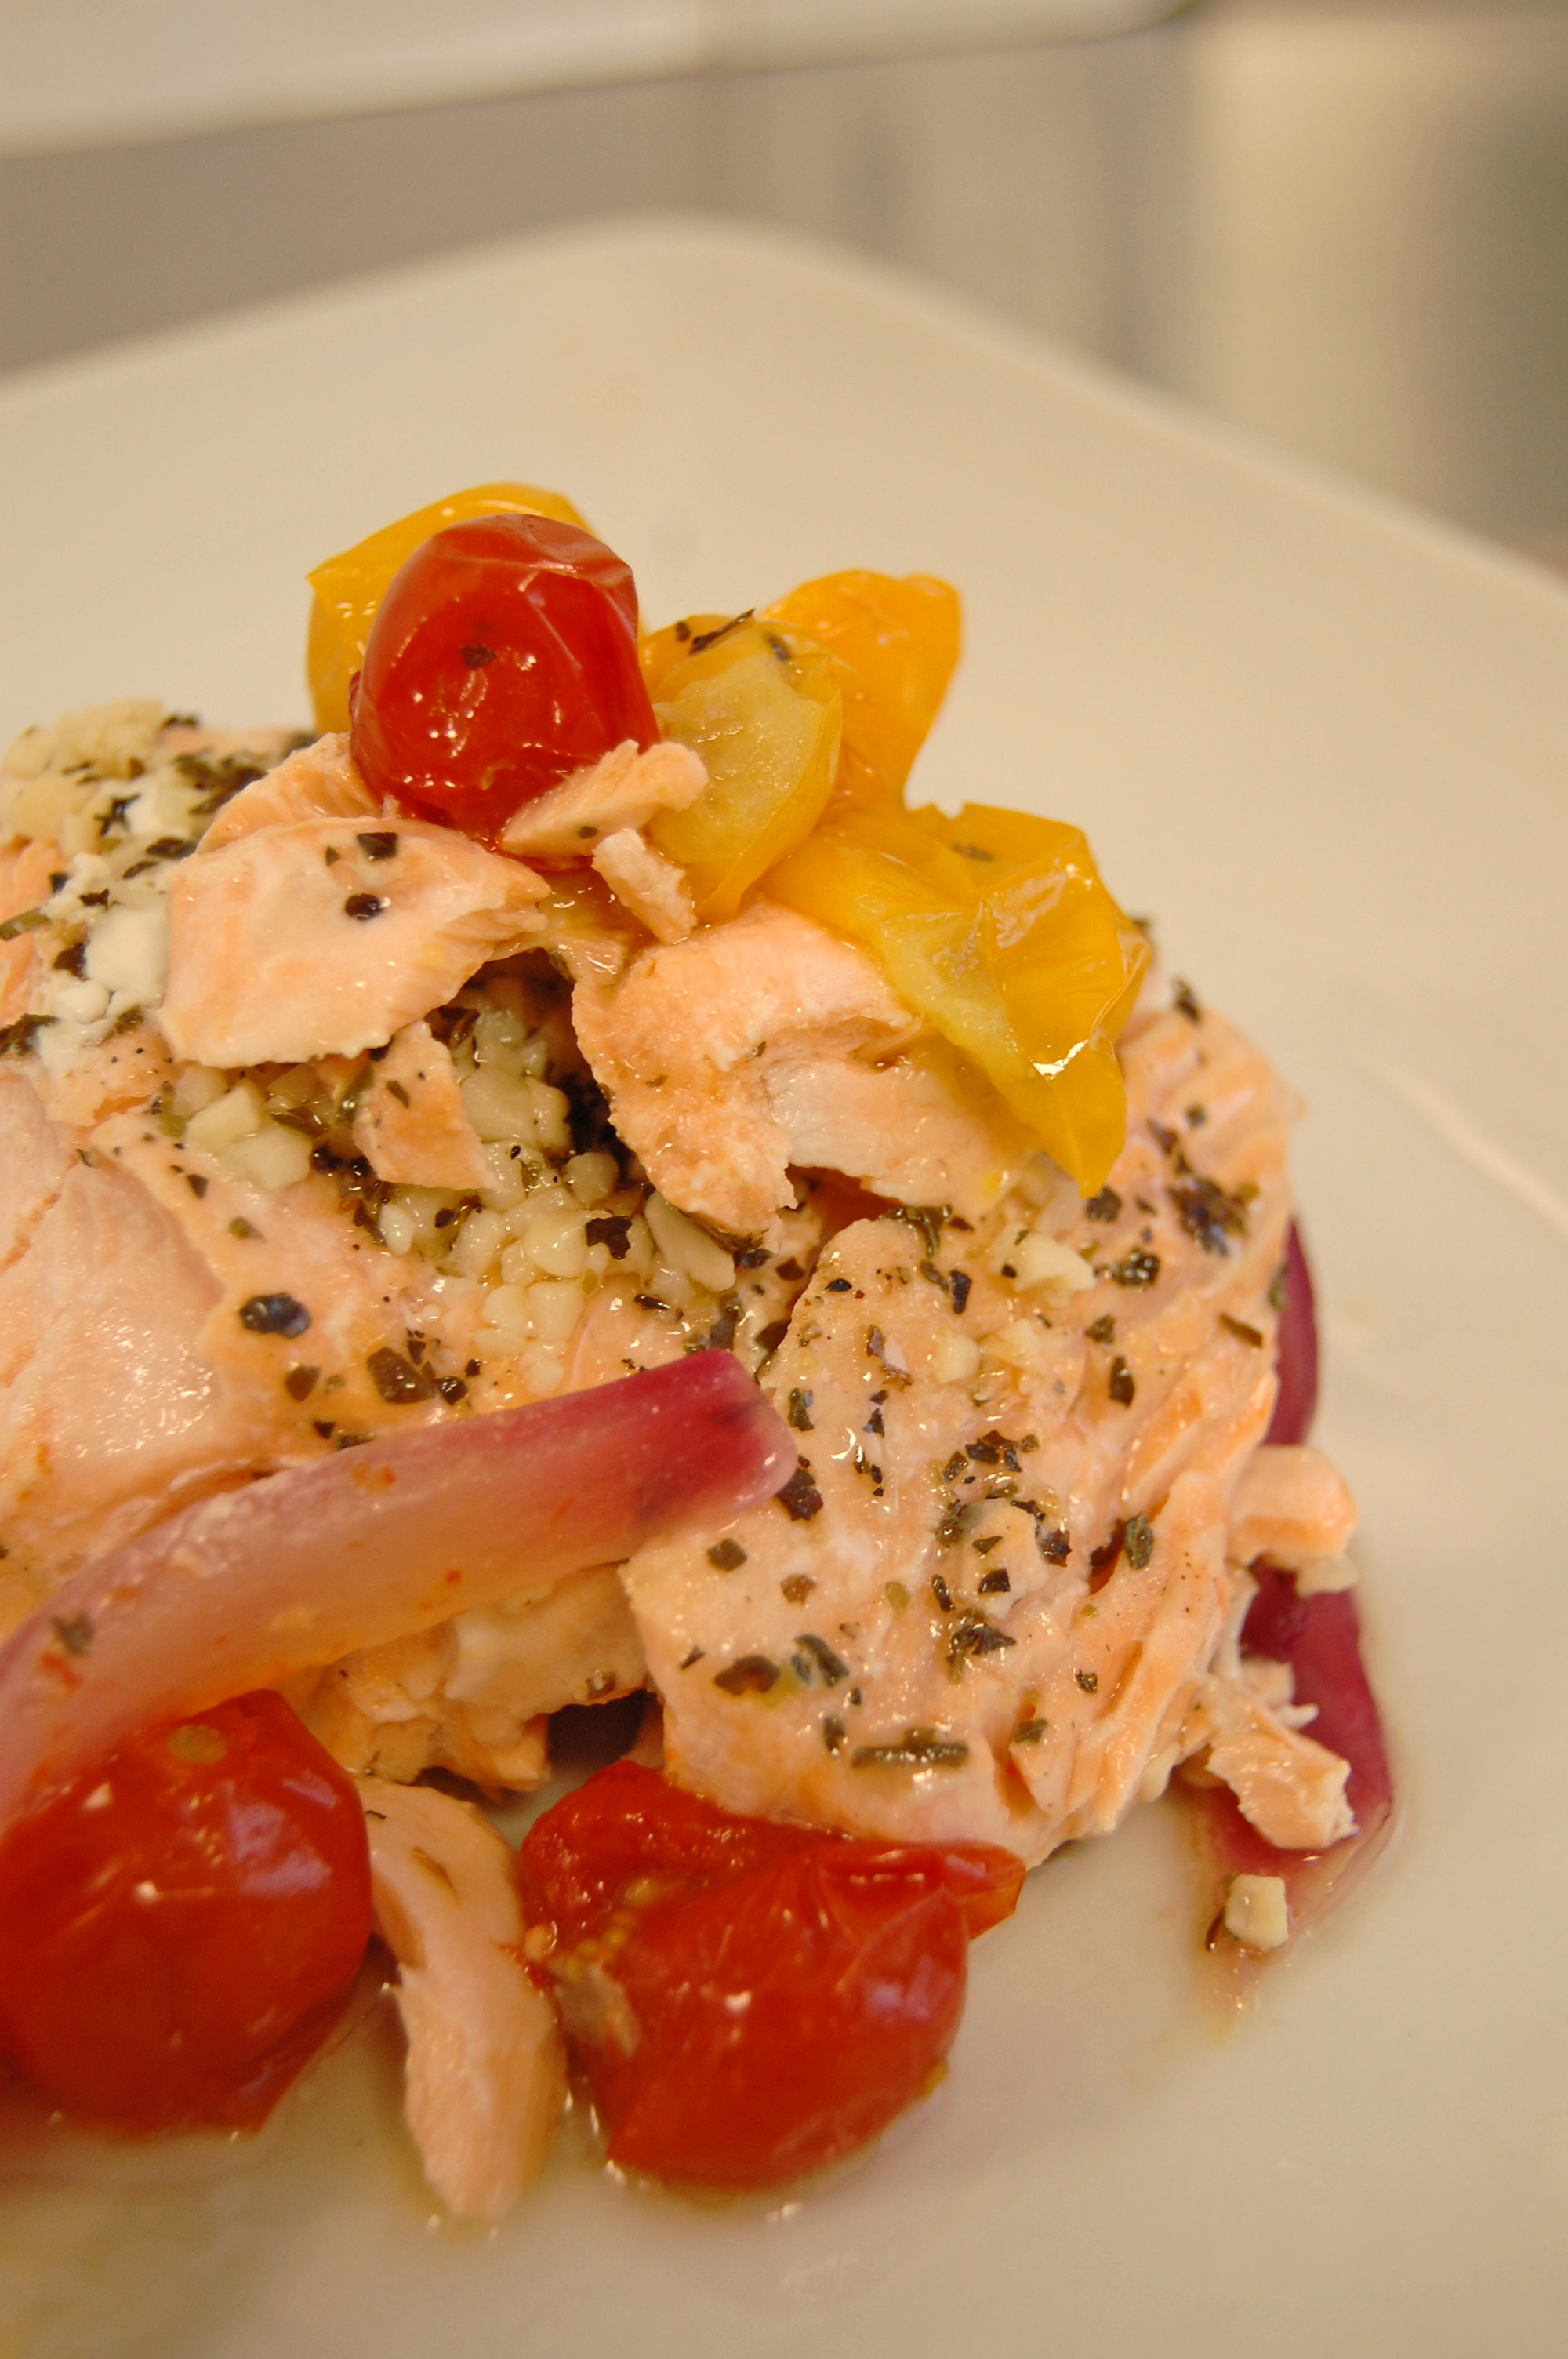 This salmon recipe can help you meet the recommendations for fish and seafood. (NDSU photo)